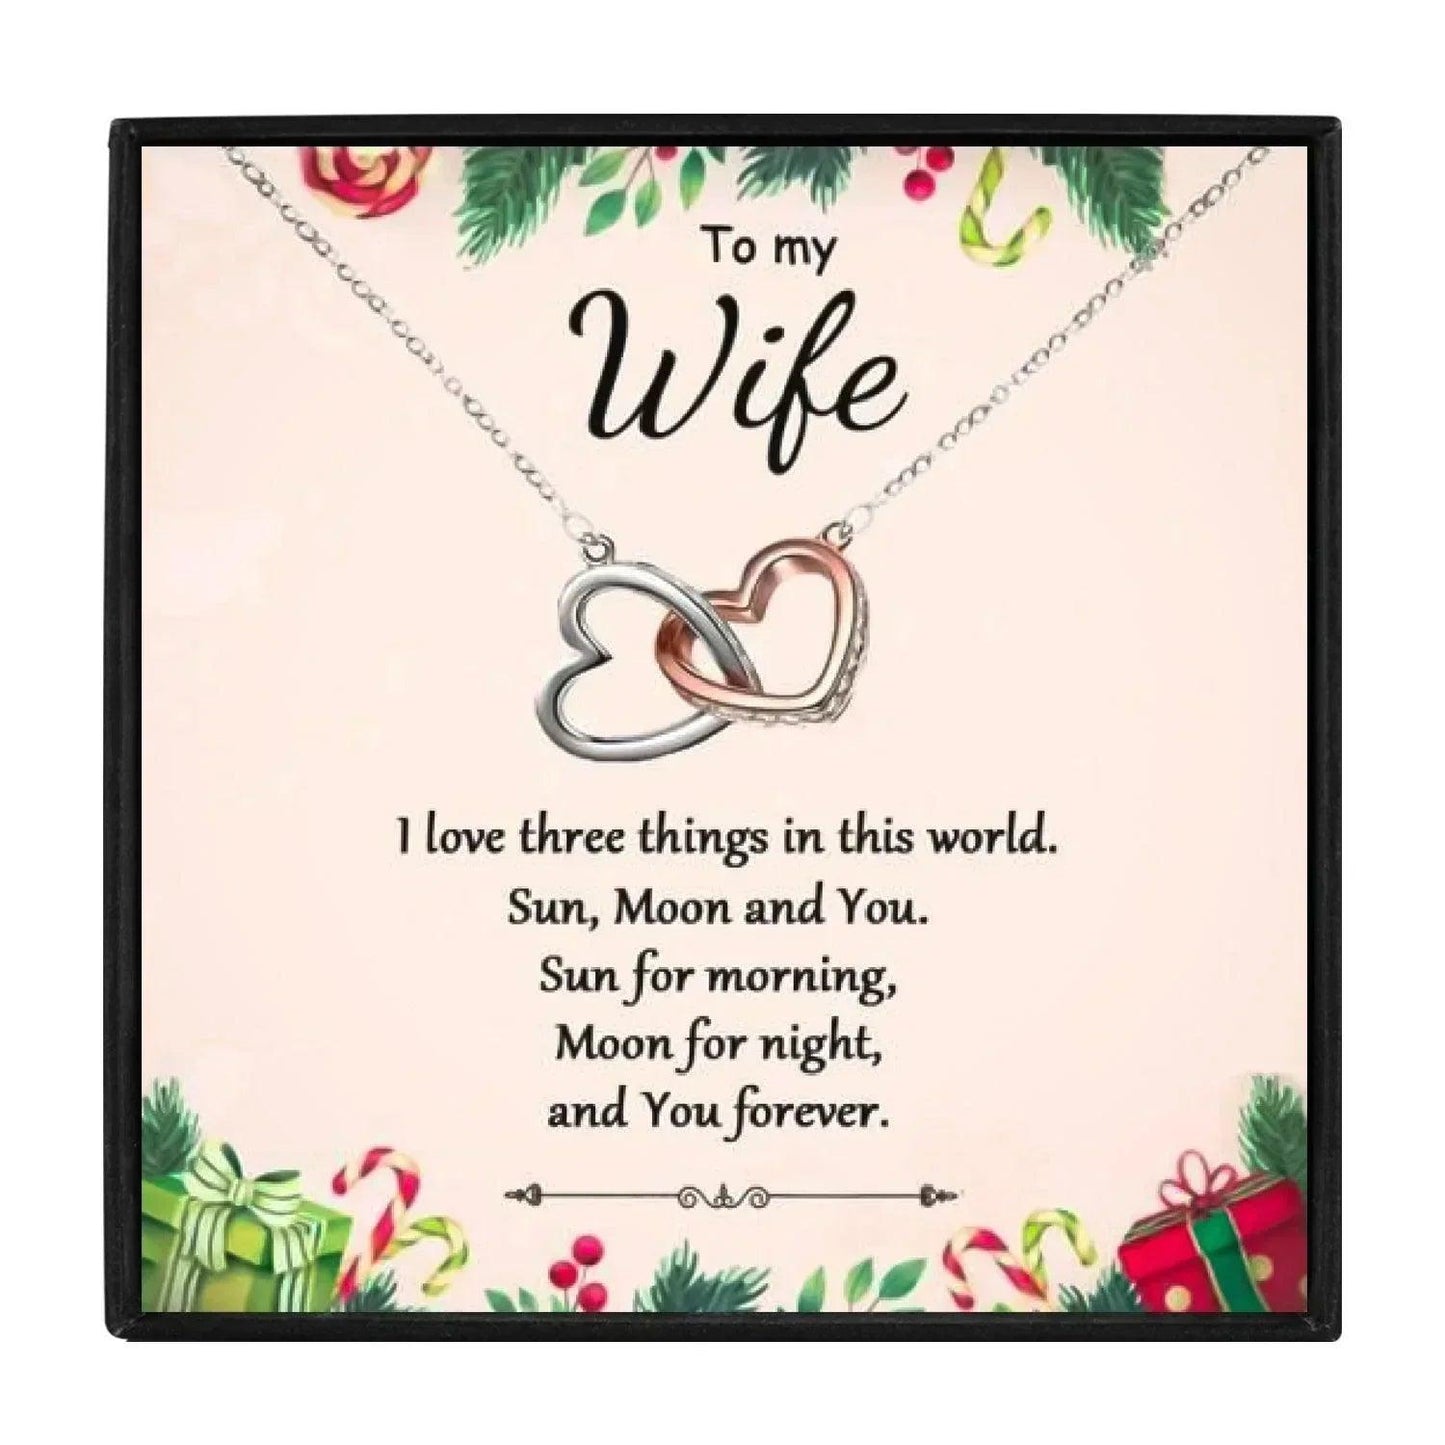 To My Wife Double Heart Pendant Necklace From Husband in 2023 | To My Wife Double Heart Pendant Necklace From Husband - undefined | wife gift, wife gift ideas | From Hunny Life | hunnylife.com